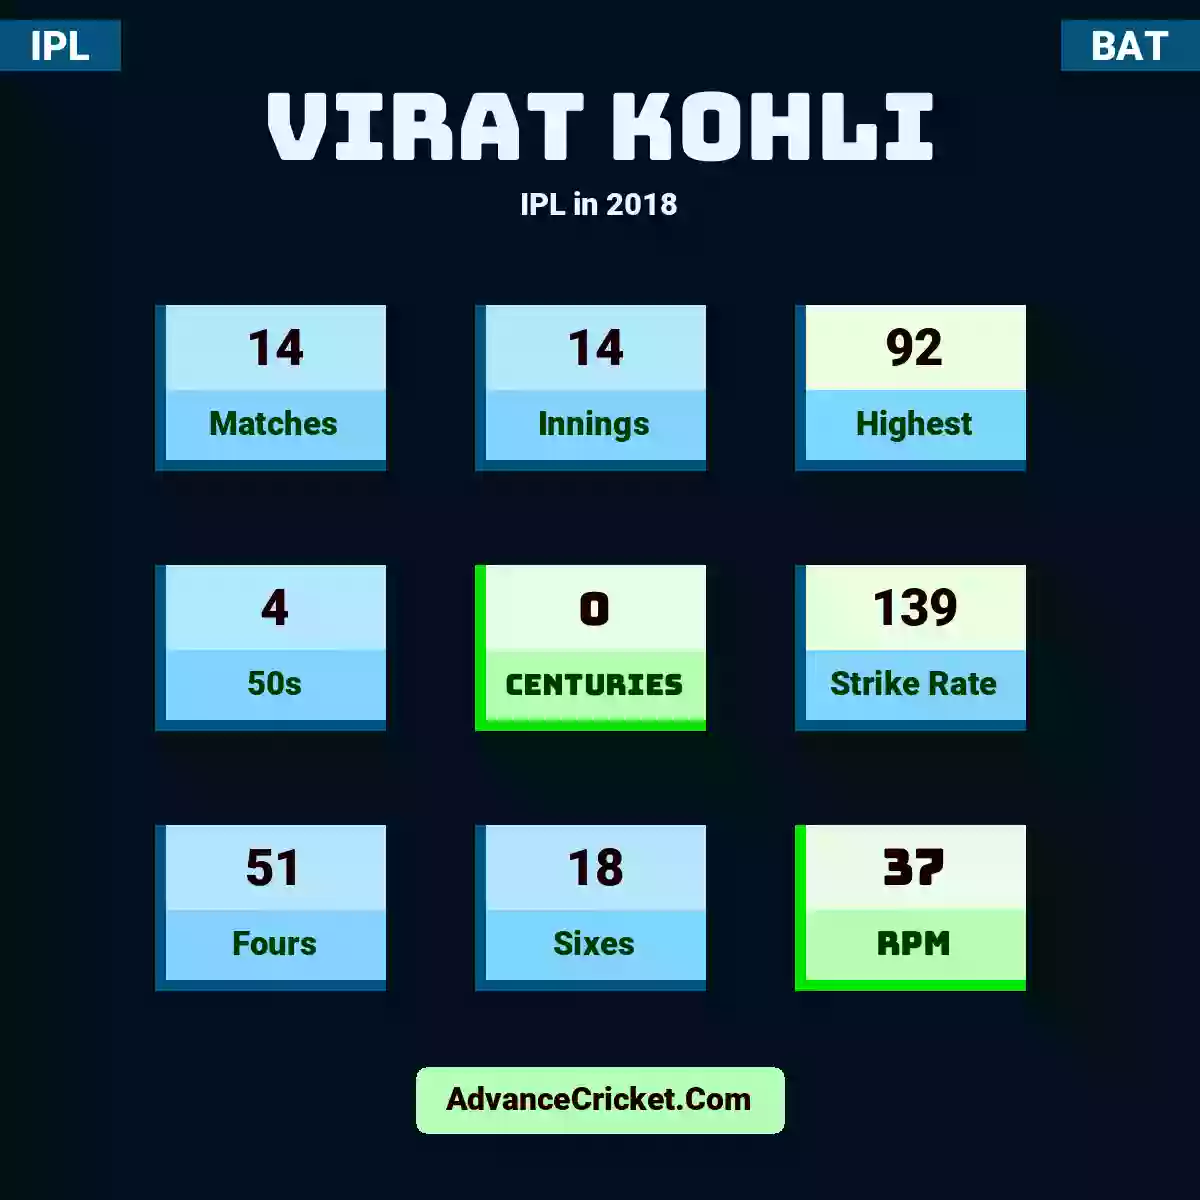 Virat Kohli IPL  in 2018, Virat Kohli played 14 matches, scored 92 runs as highest, 4 half-centuries, and 0 centuries, with a strike rate of 139. V.Kohli hit 51 fours and 18 sixes, with an RPM of 37.